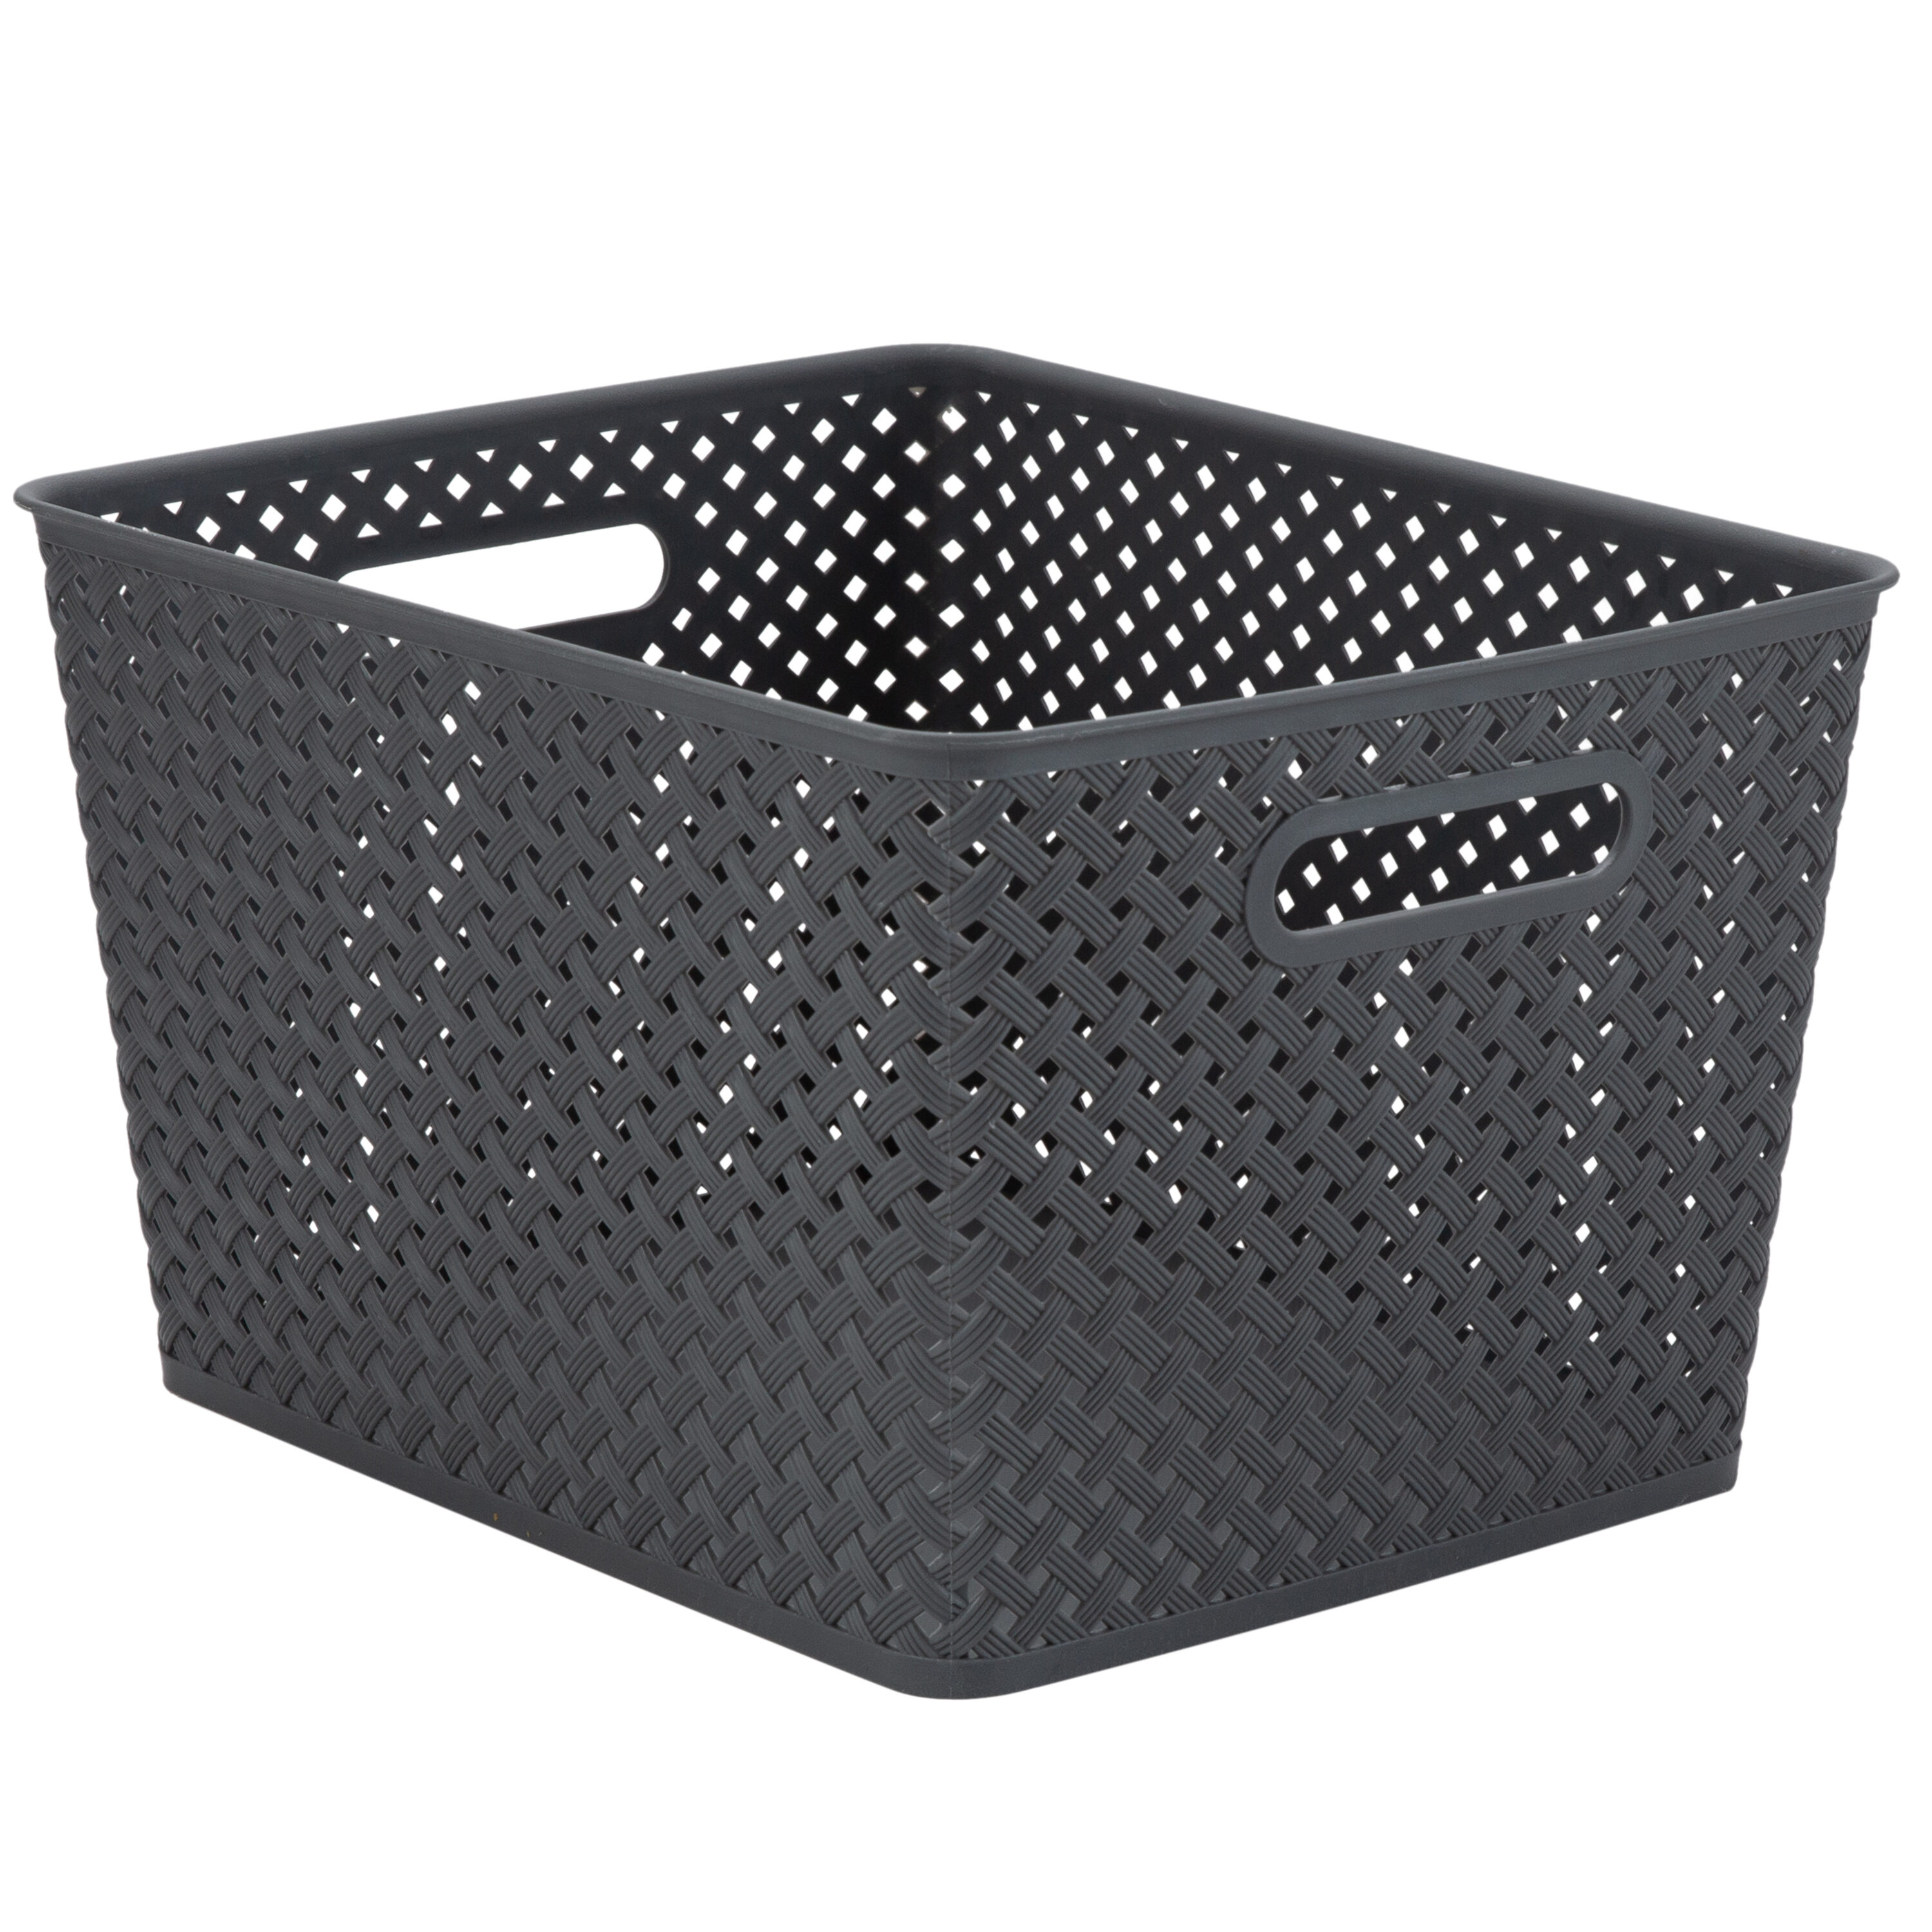 Simplify 11.42-in W x 8.66-in H x 13.78-in D Gray Polypropylene Basket in the Storage & Baskets department at Lowes.com